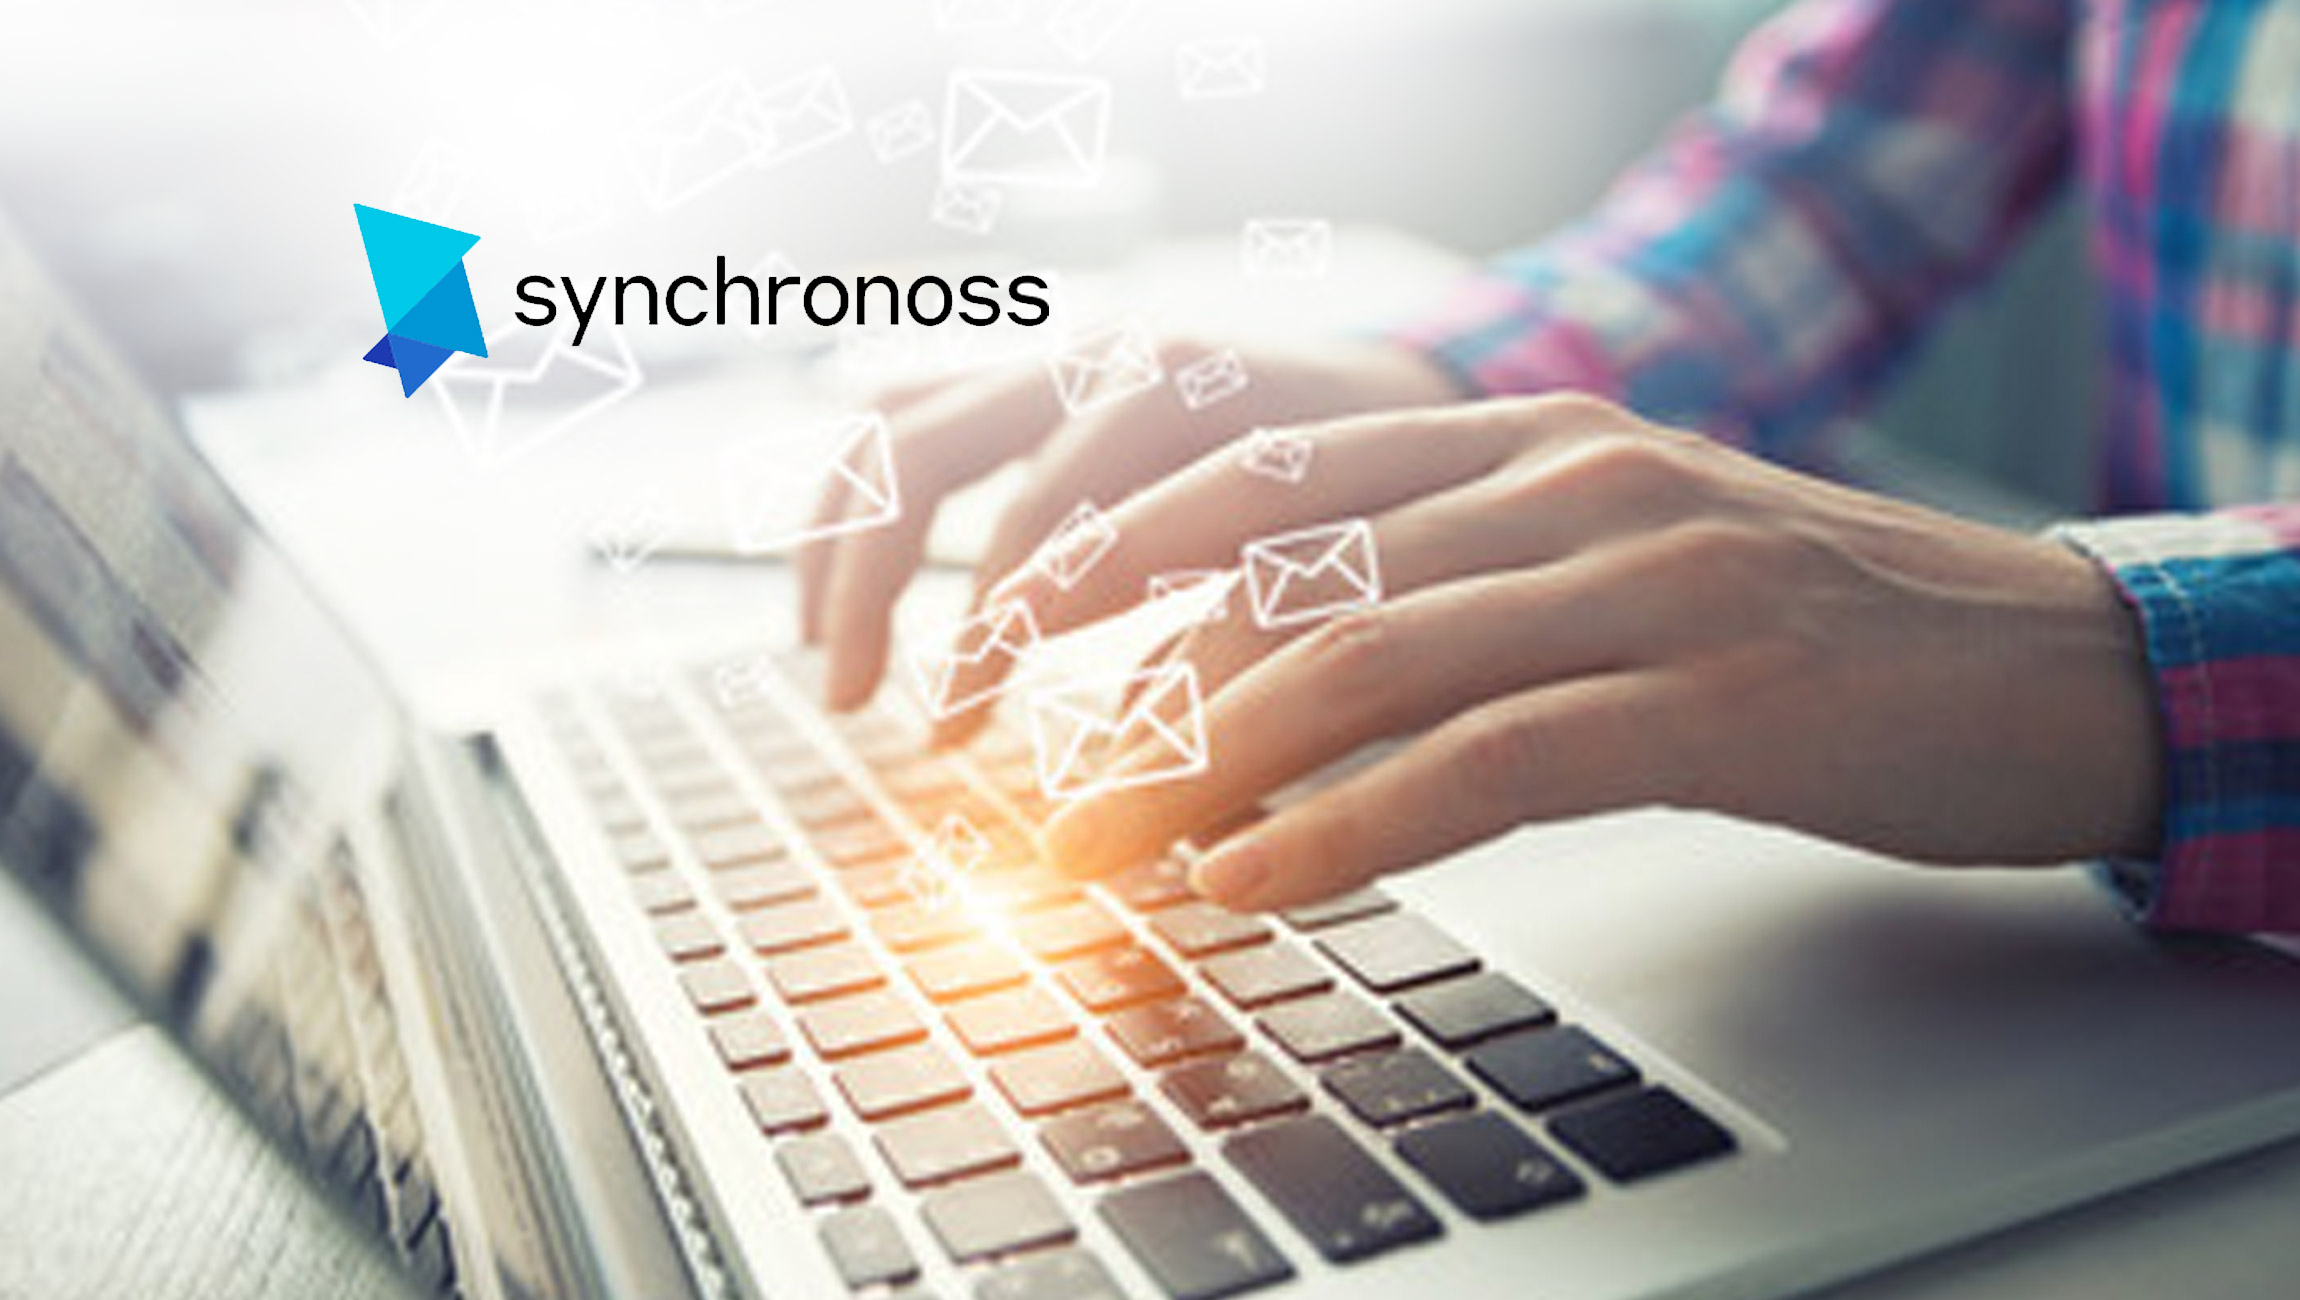 Leading Telco Operator in Italy Migrates 13.5 Million Subscribers to the Latest Version of Synchronoss Email Suite